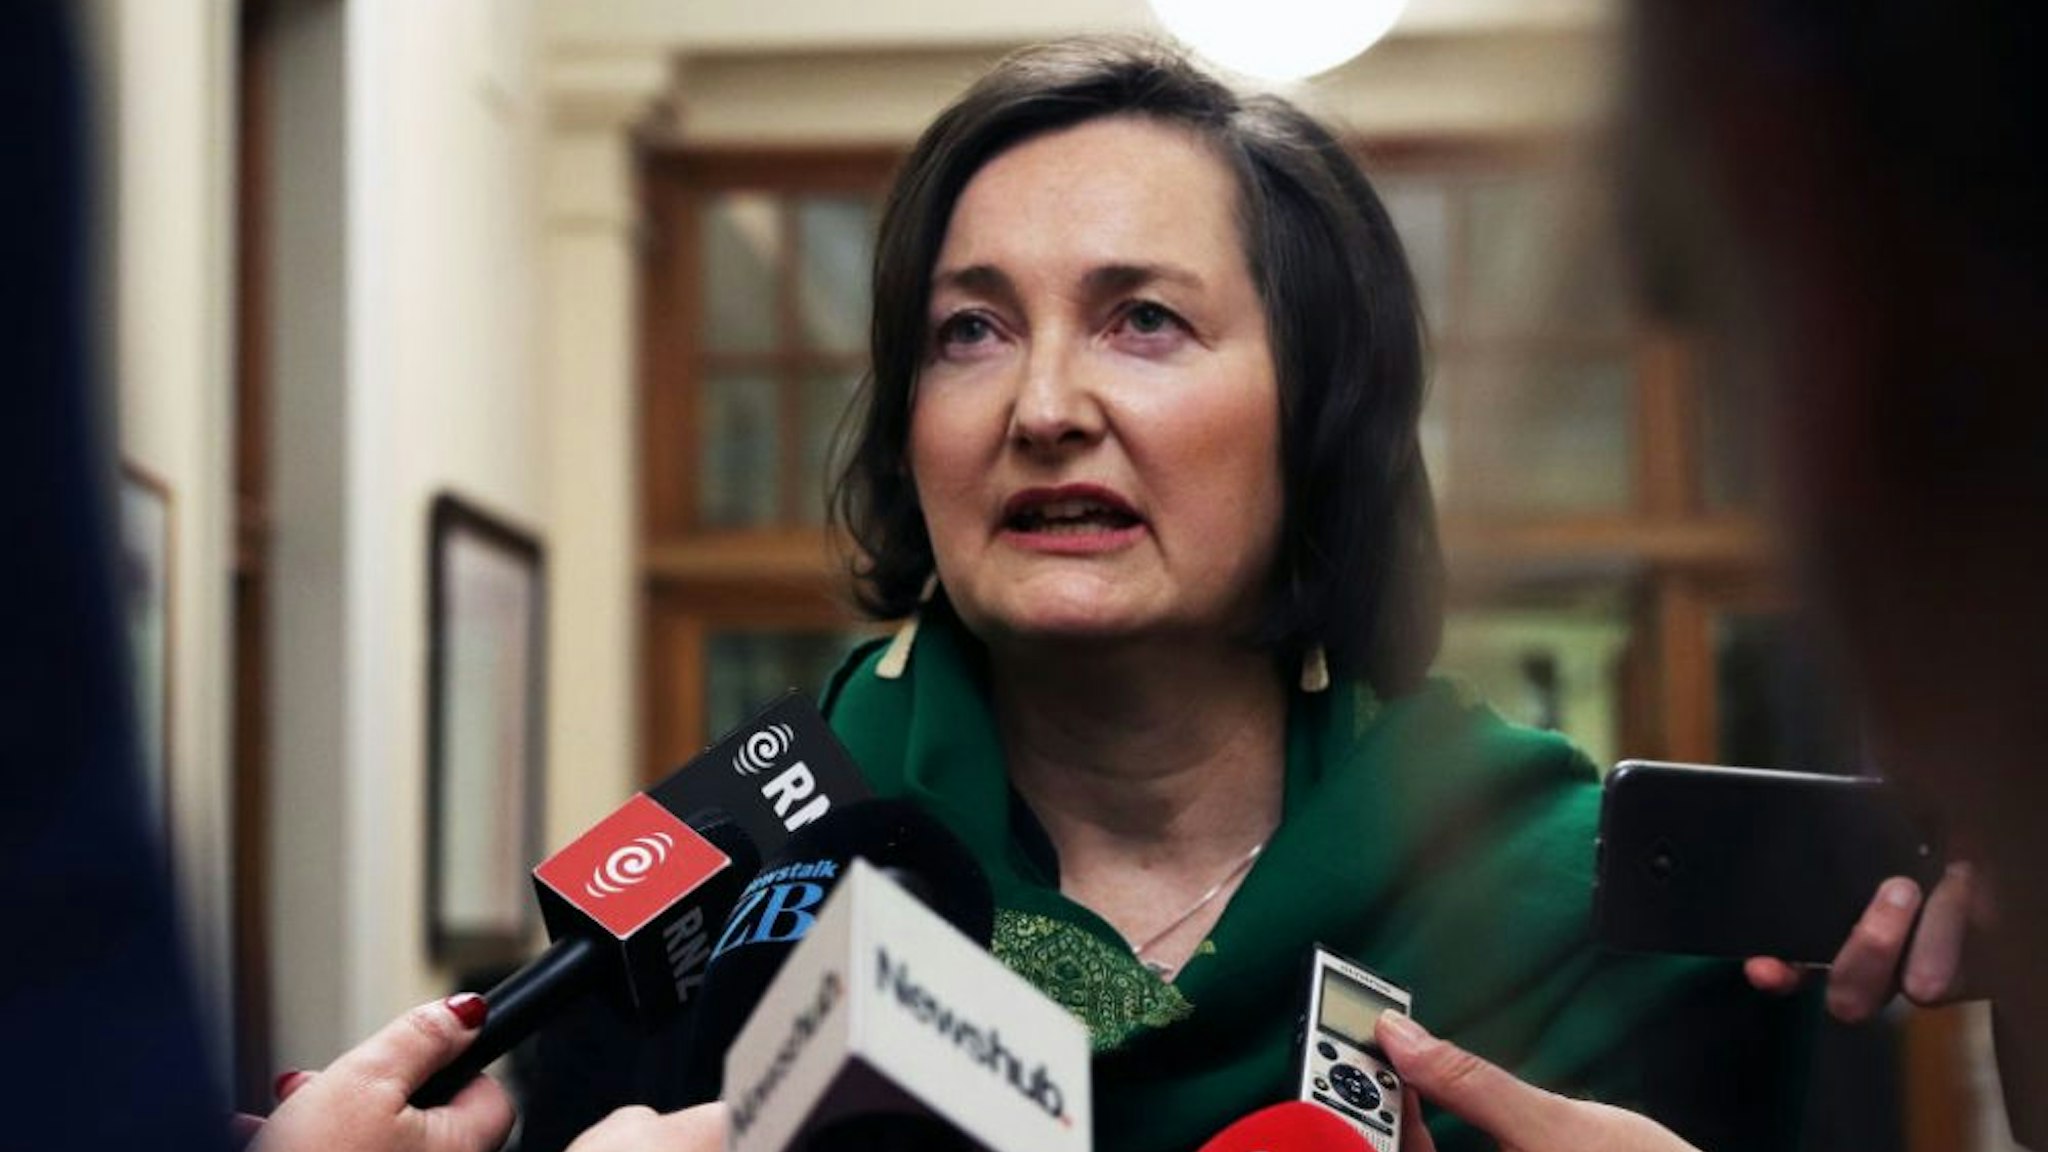 WELLINGTON, NEW ZEALAND: University of Canterbury Professor Anne-Marie Brady, author of the research paper "Magic Weapons: CCP Political Influence Activities Under Xi Jinping" about Chinese soft power and influence, talks to press gallery reporters on 9 May 2019 after making a submission to the Parliamentary select committee inquiry into foreign interference.